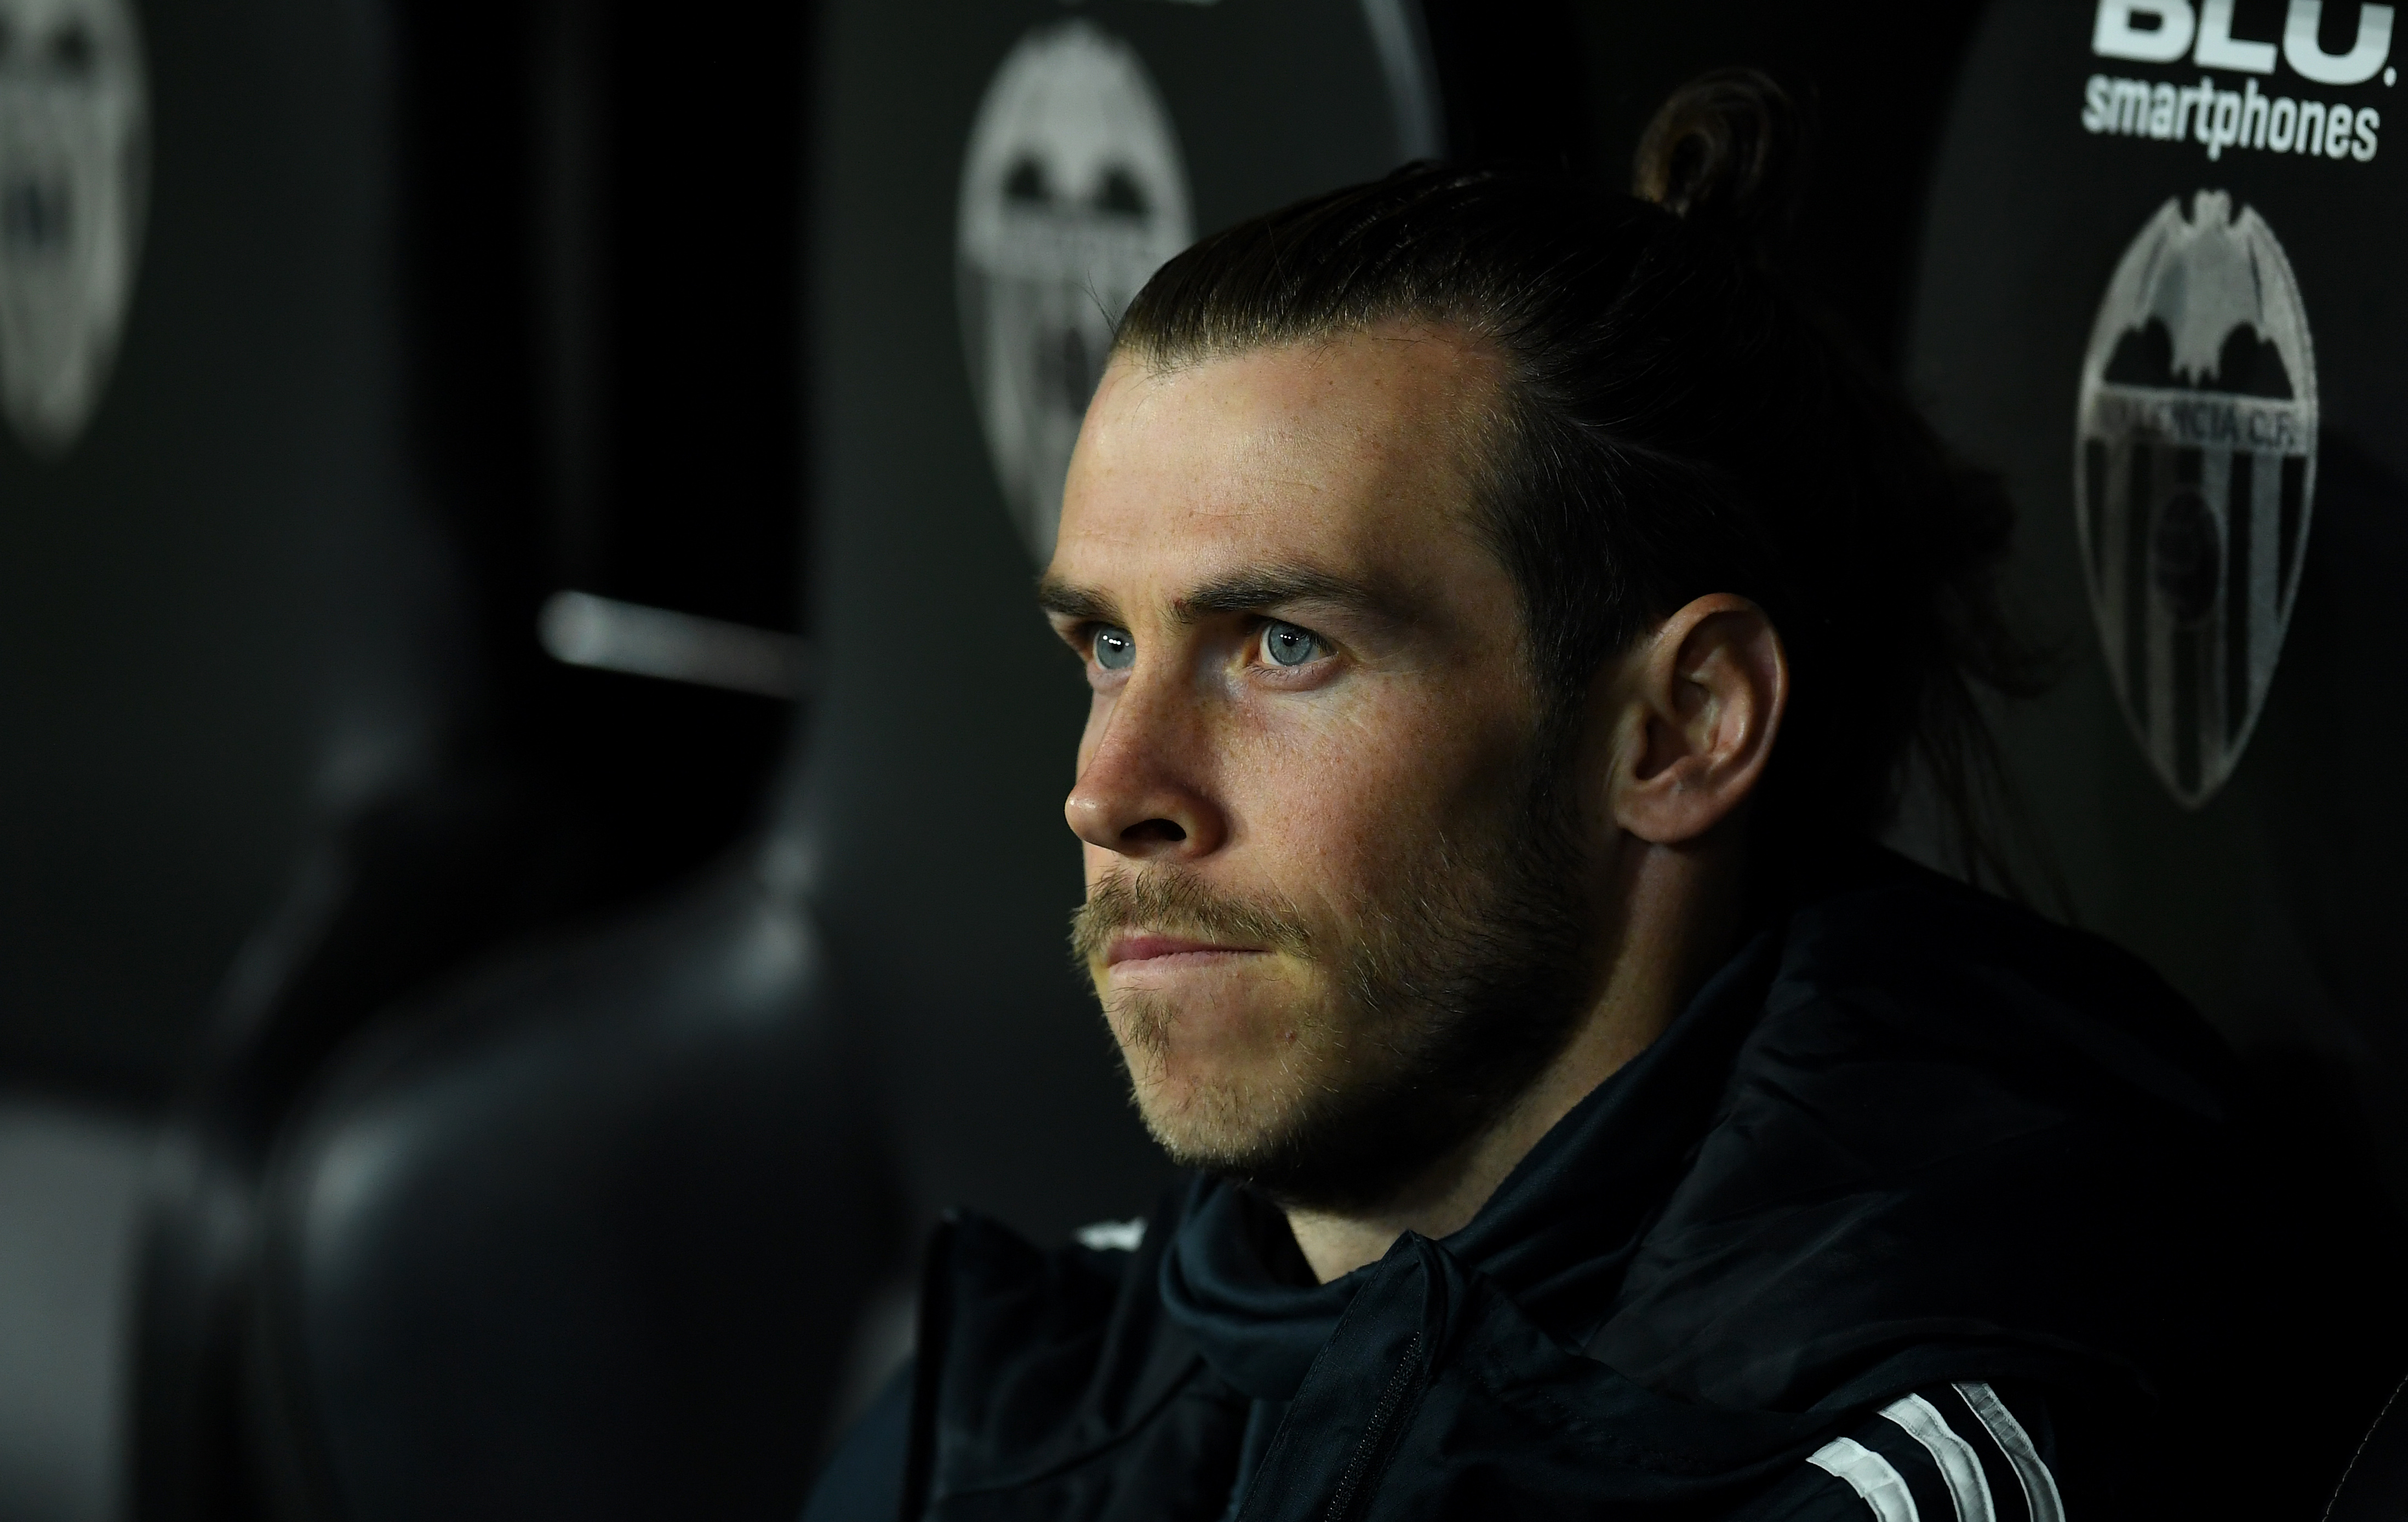 VALENCIA, SPAIN - APRIL 03:  Gareth Bale of Real Madrid sits on the bench prior to the La Liga match between Valencia CF and Real Madrid CF at Estadio Mestalla on April 03, 2019 in Valencia, Spain. (Photo by David Ramos/Getty Images)